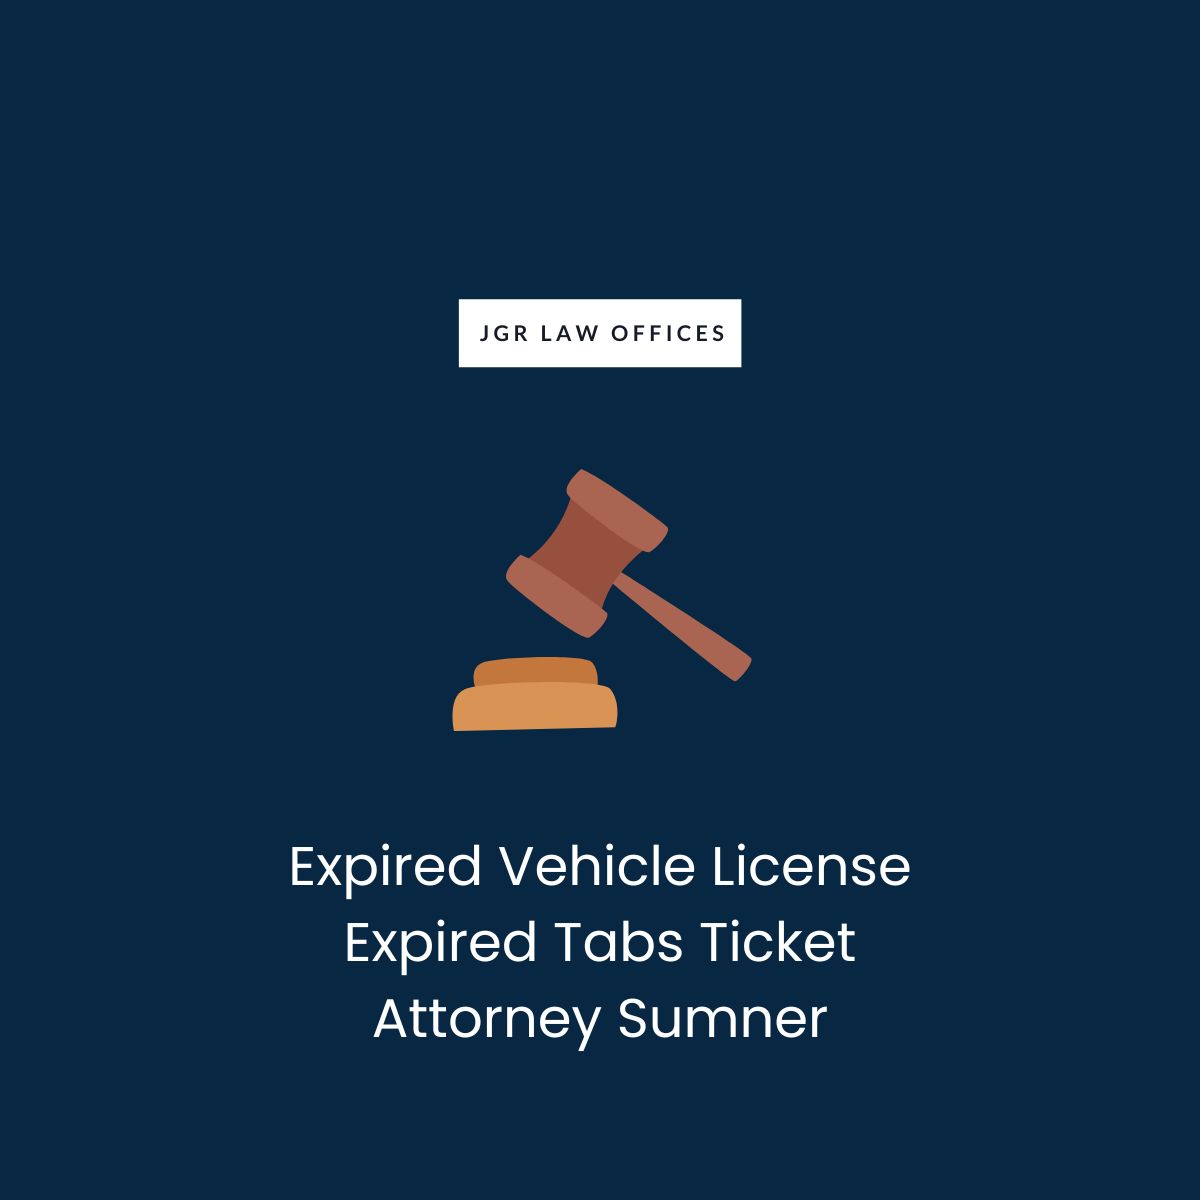 Expired Vehicle License Expired Tabs Ticket Attorney Sumner